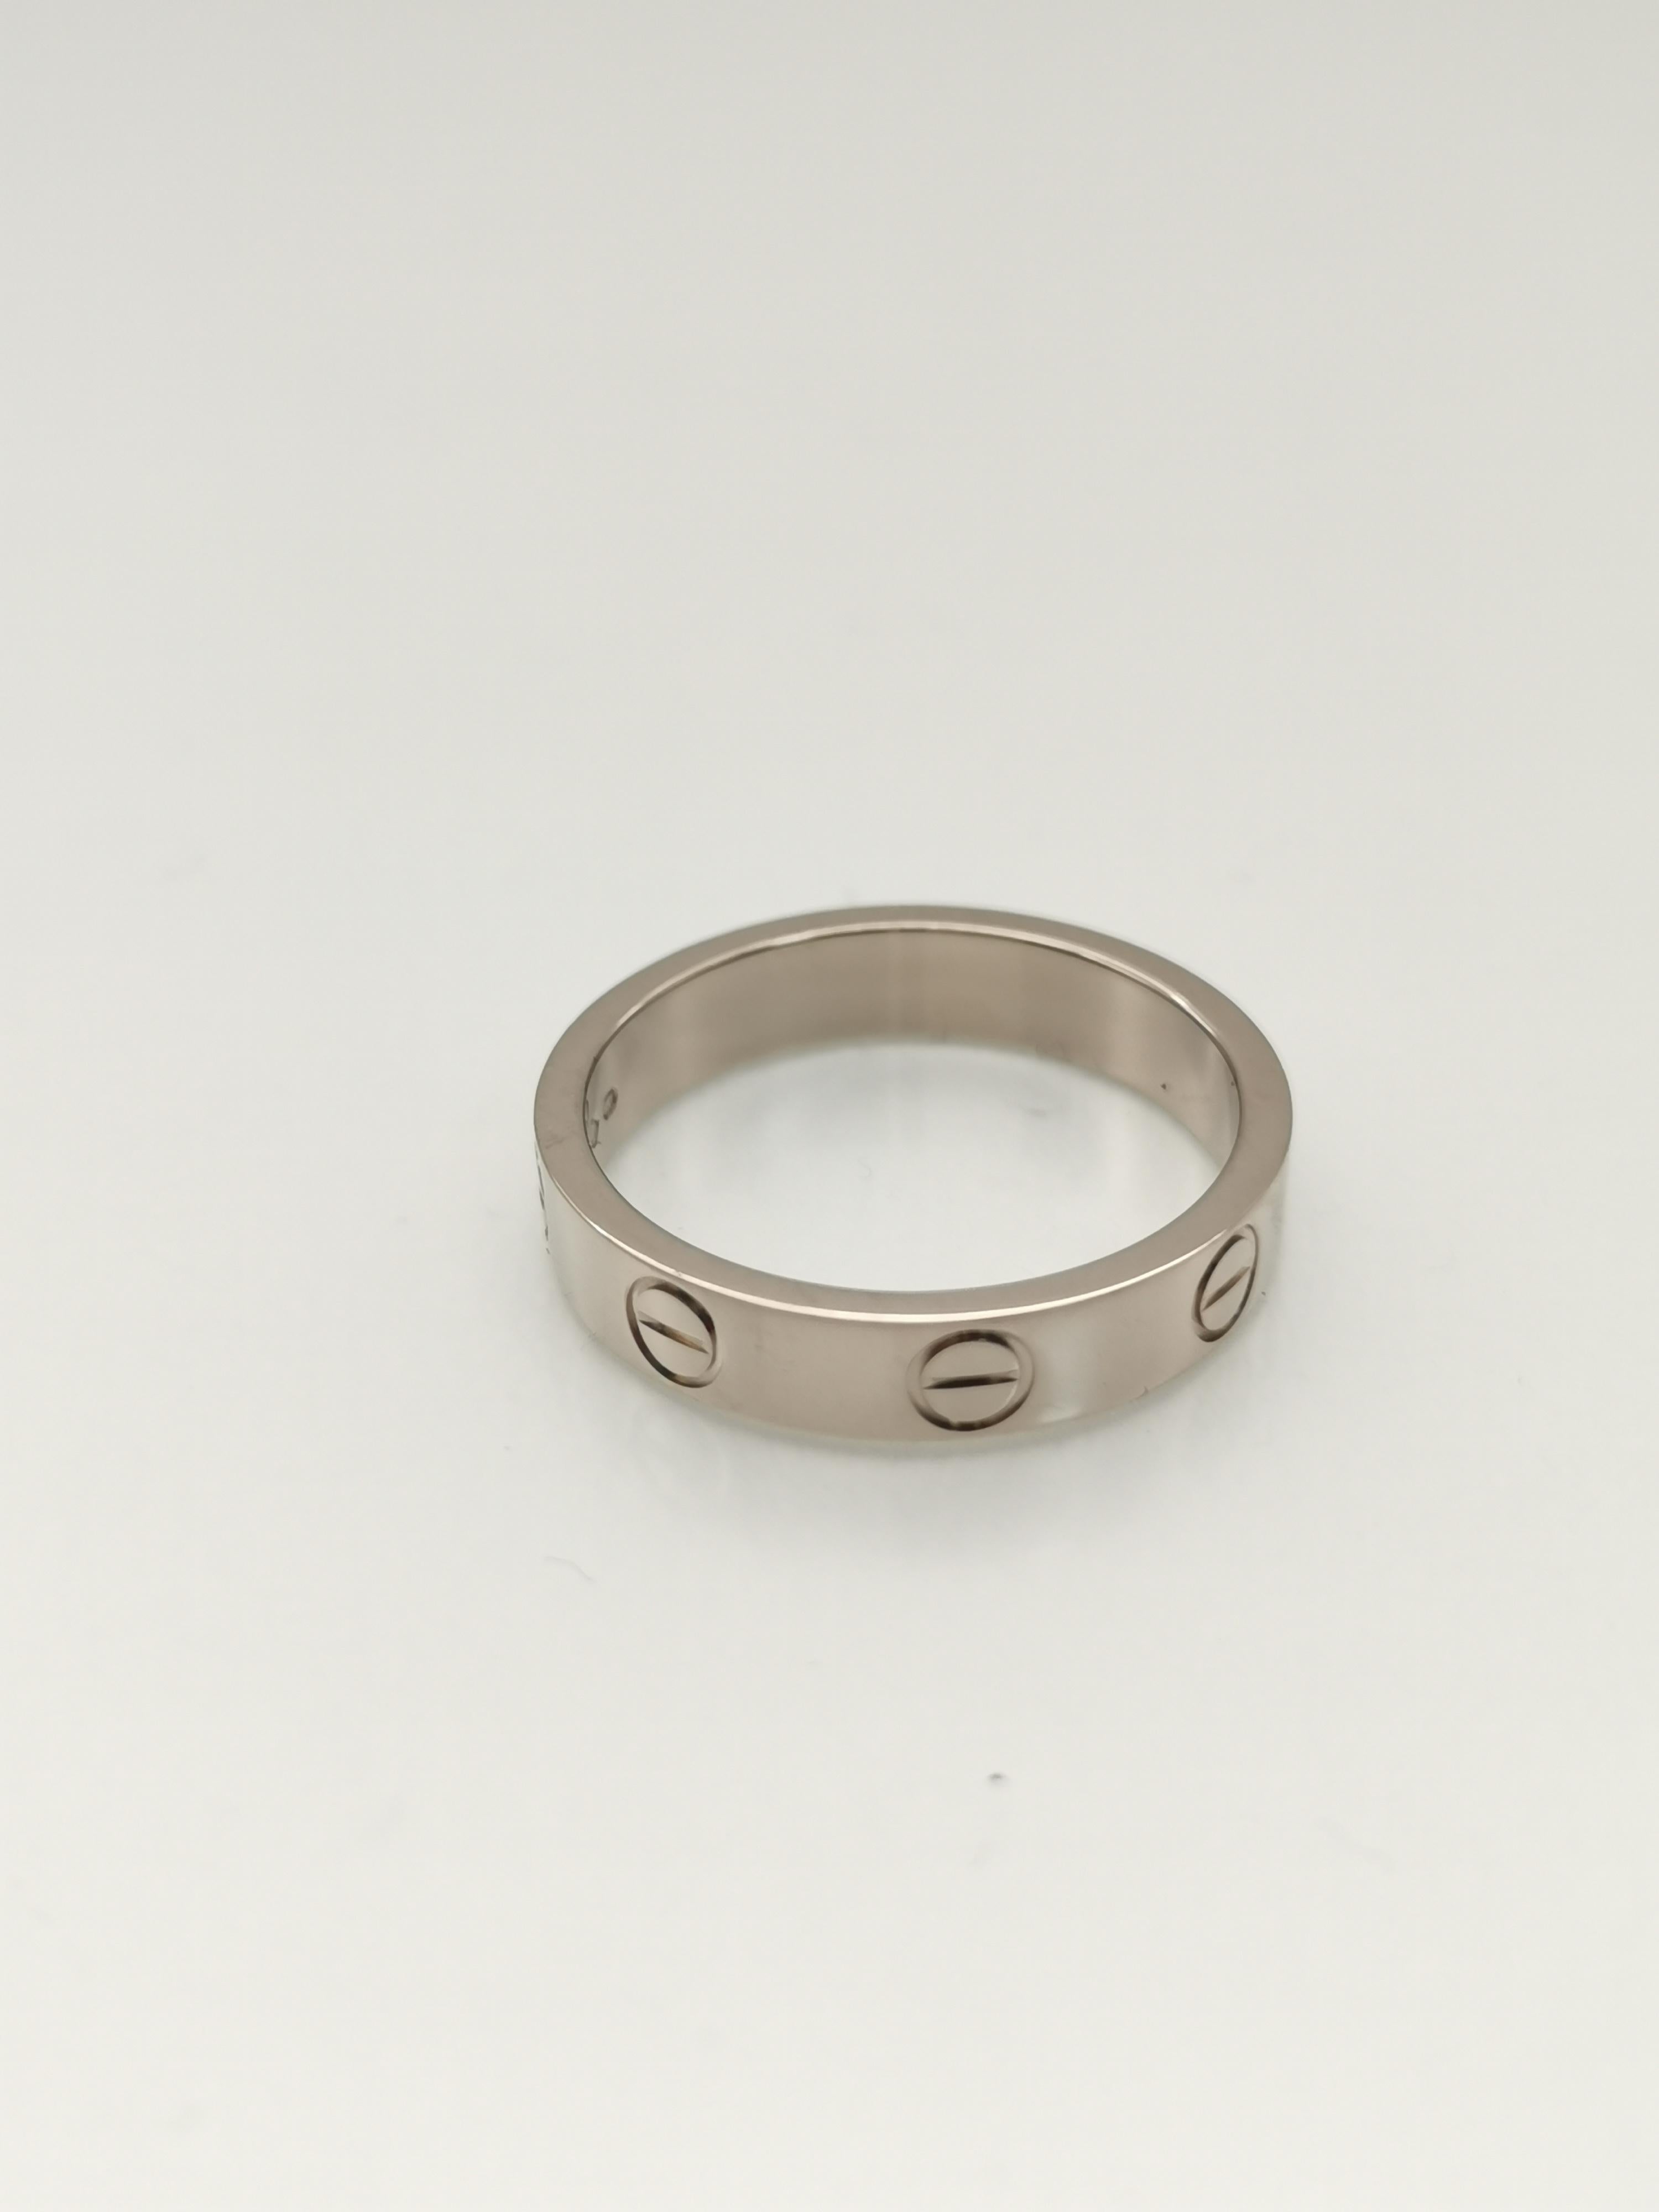 Designer: Cartier

Metal: White Gold

Metal Purity: 18k

Ring Size: 50 (euro) ; 5.25 (US)

Measurements: Band is: 3.5mm wide

Total Item Weight (g): 3.83

Hallmark: Cartier 750 50 Serial No.DD6456